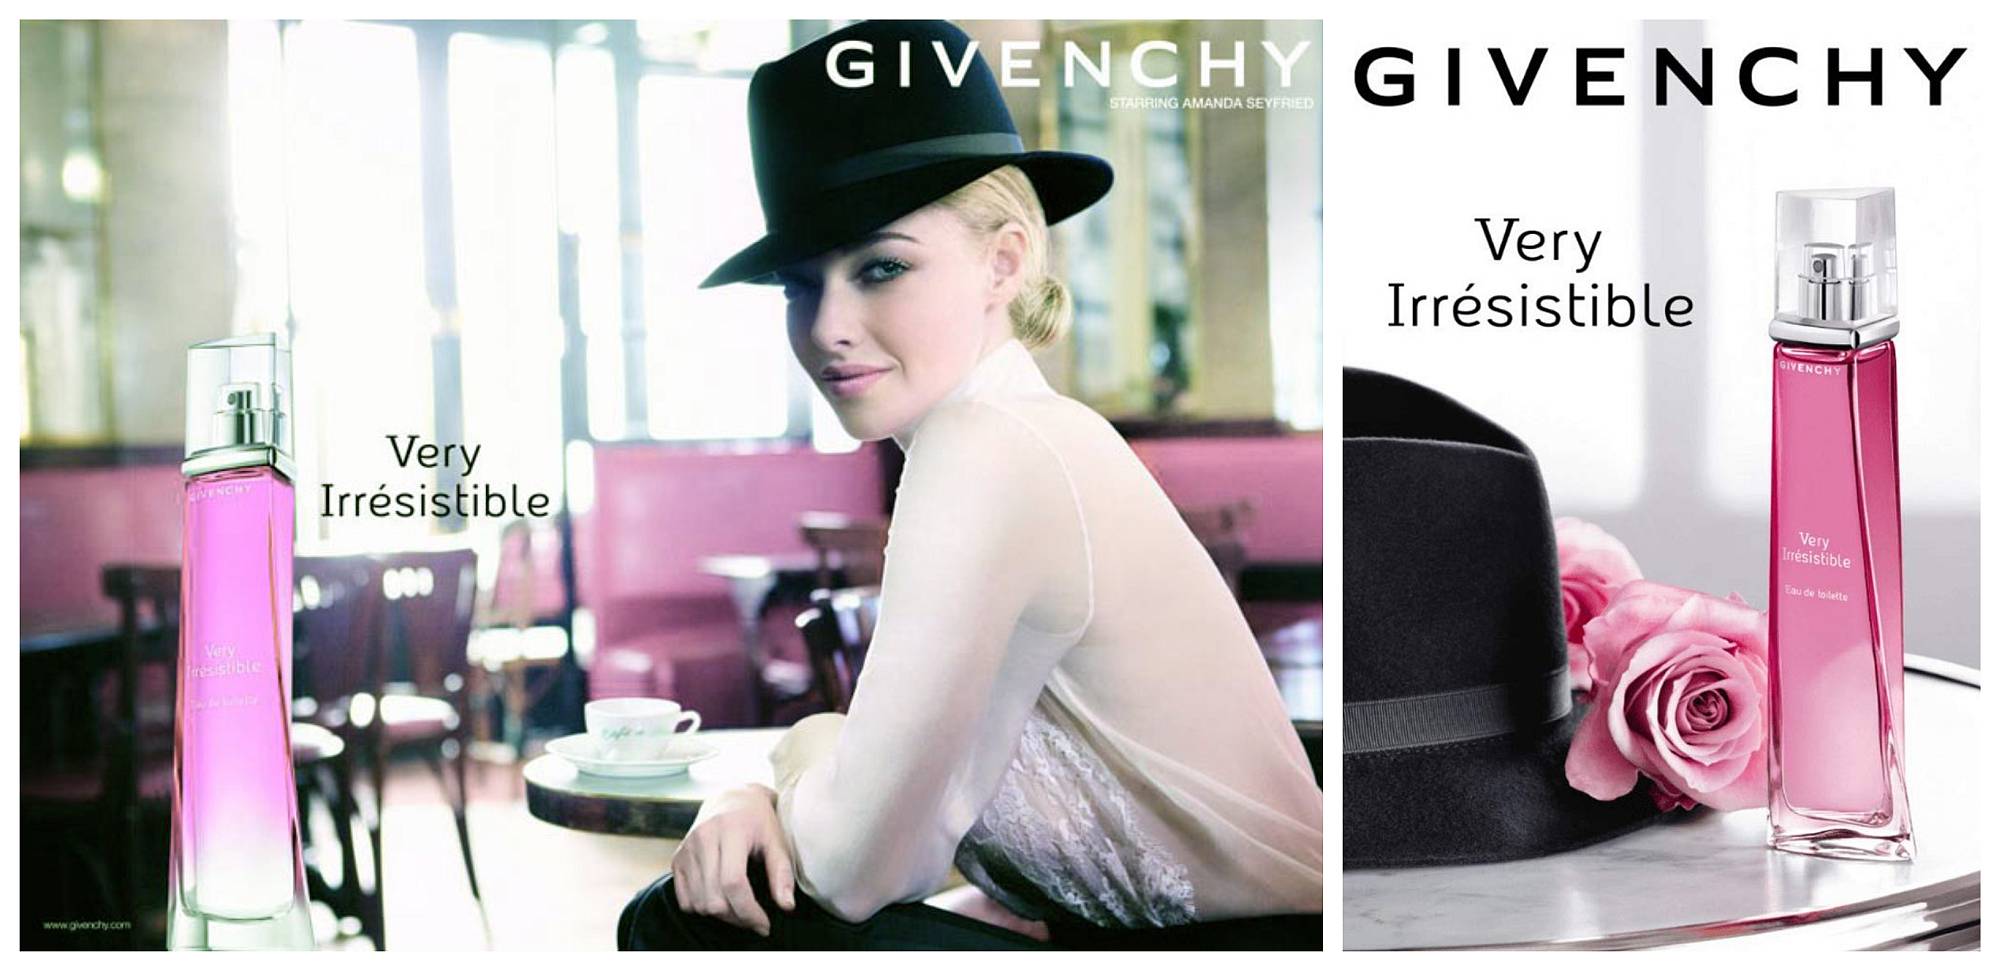 20 Years of Very Irresistible Givenchy! ~ Fragrance Reviews